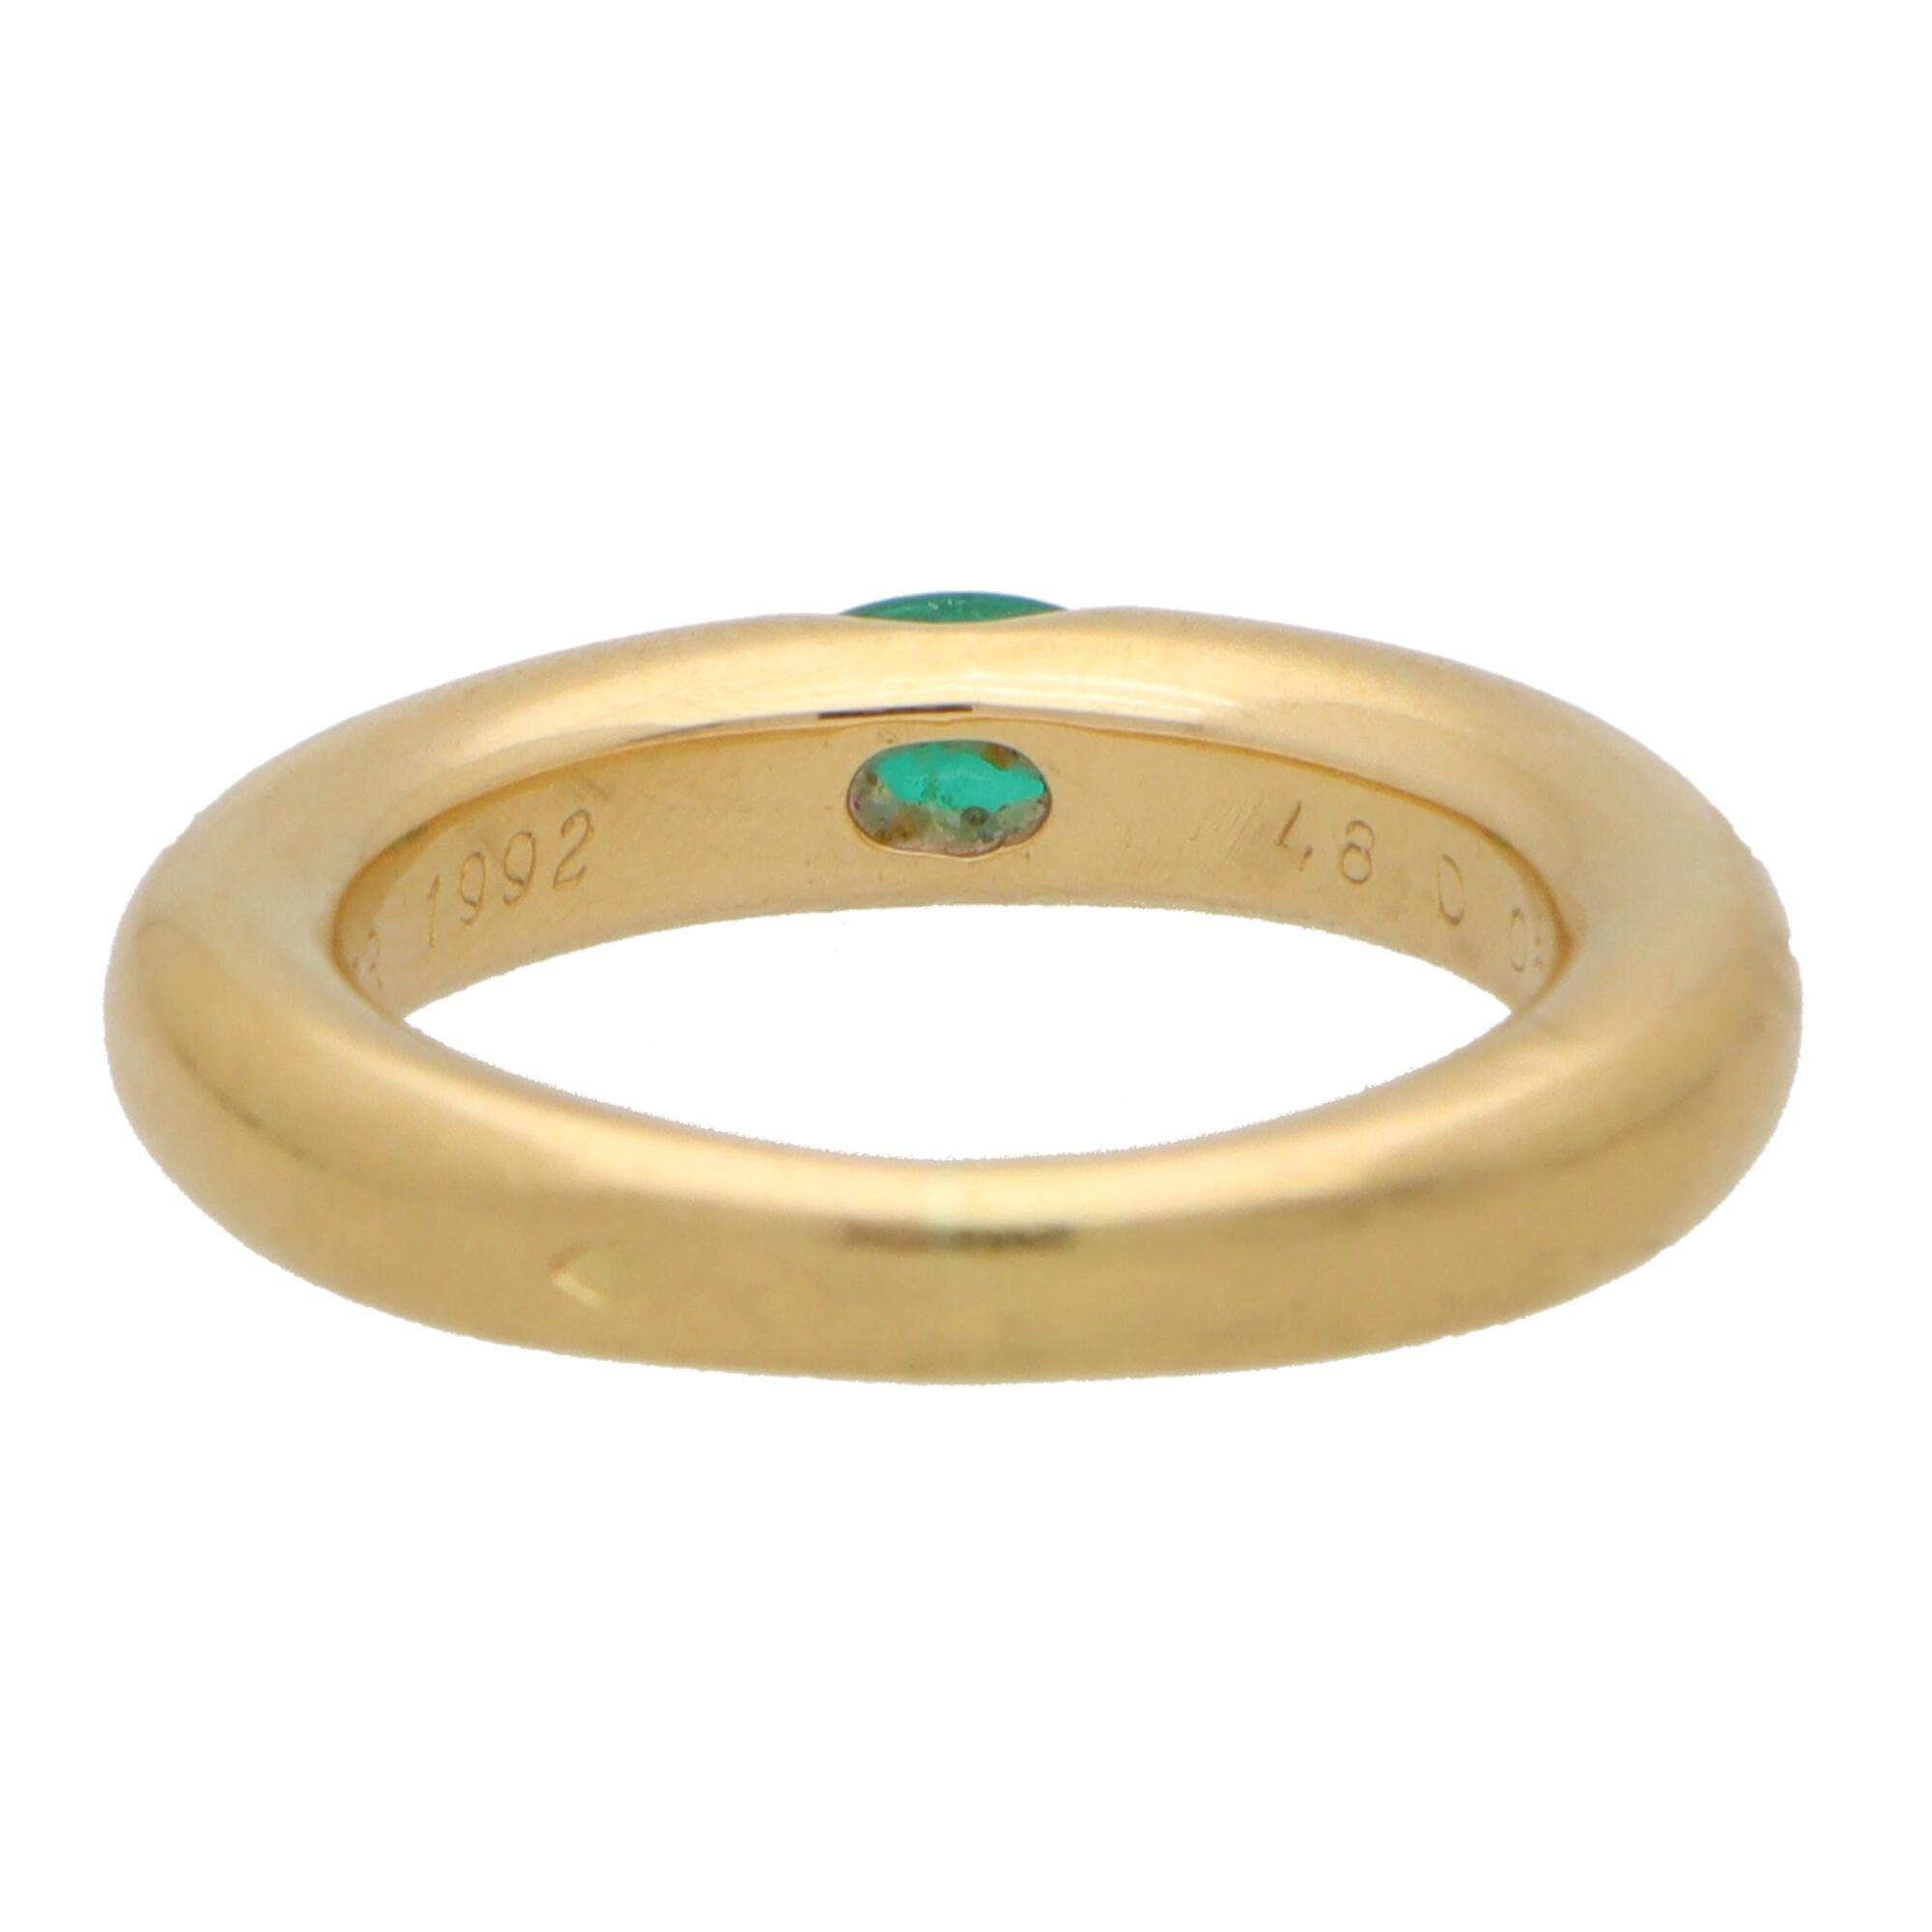 Retro Vintage Cartier Ellipse Emerald Band Ring Set in 18k Yellow Gold